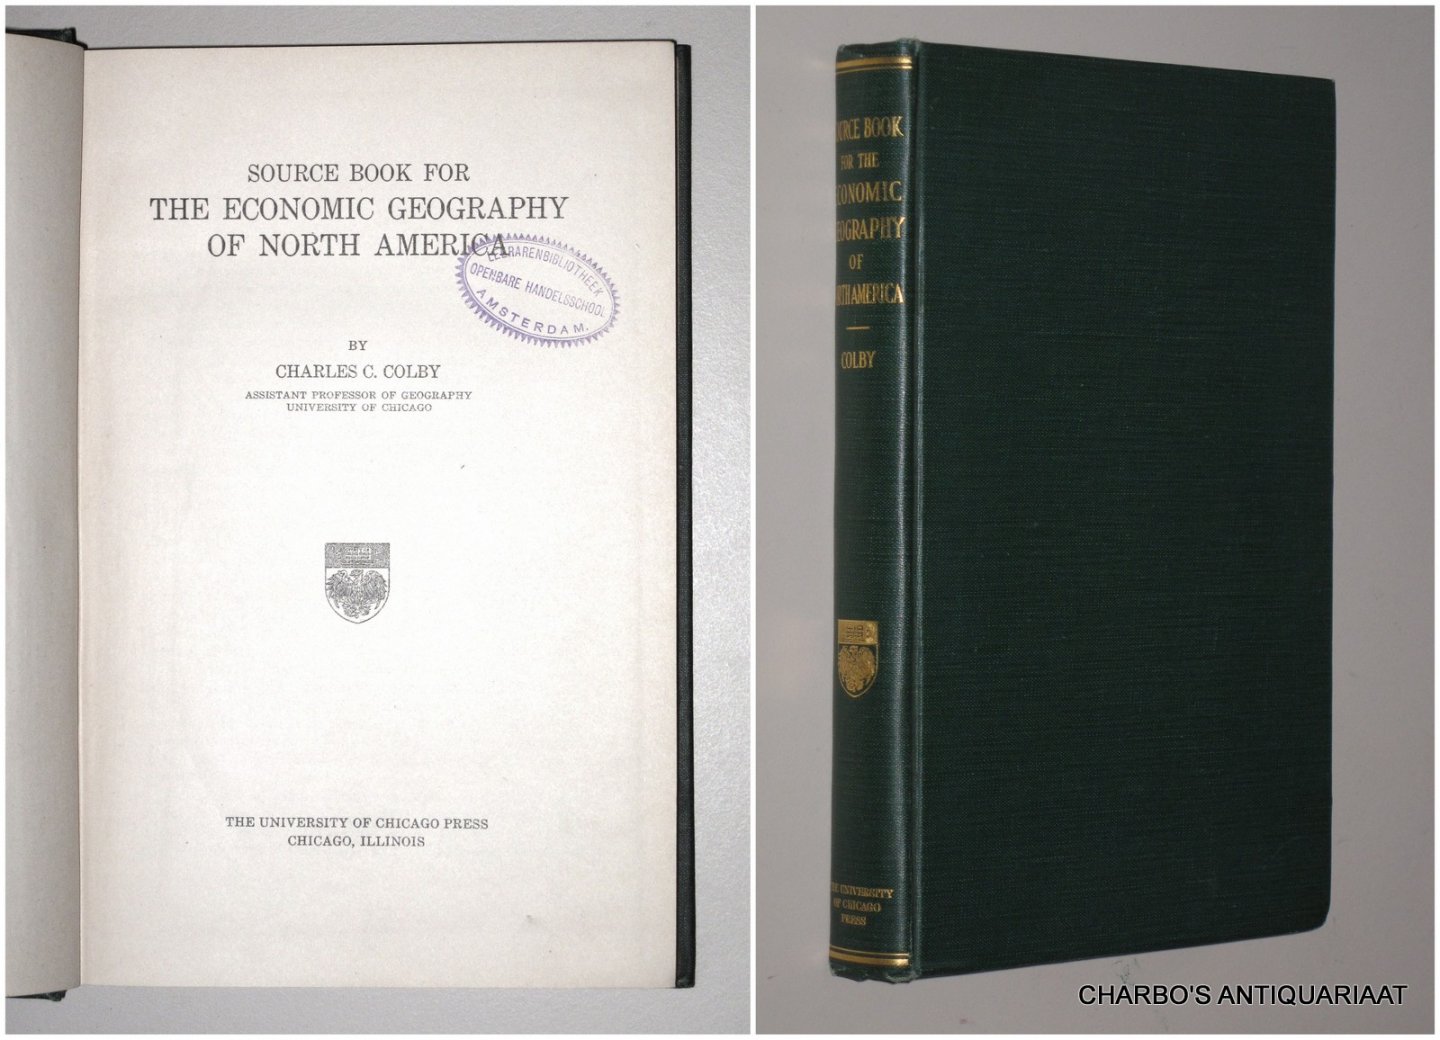 COLBY, CHARLES C., - Source book for the economic geography of North America.